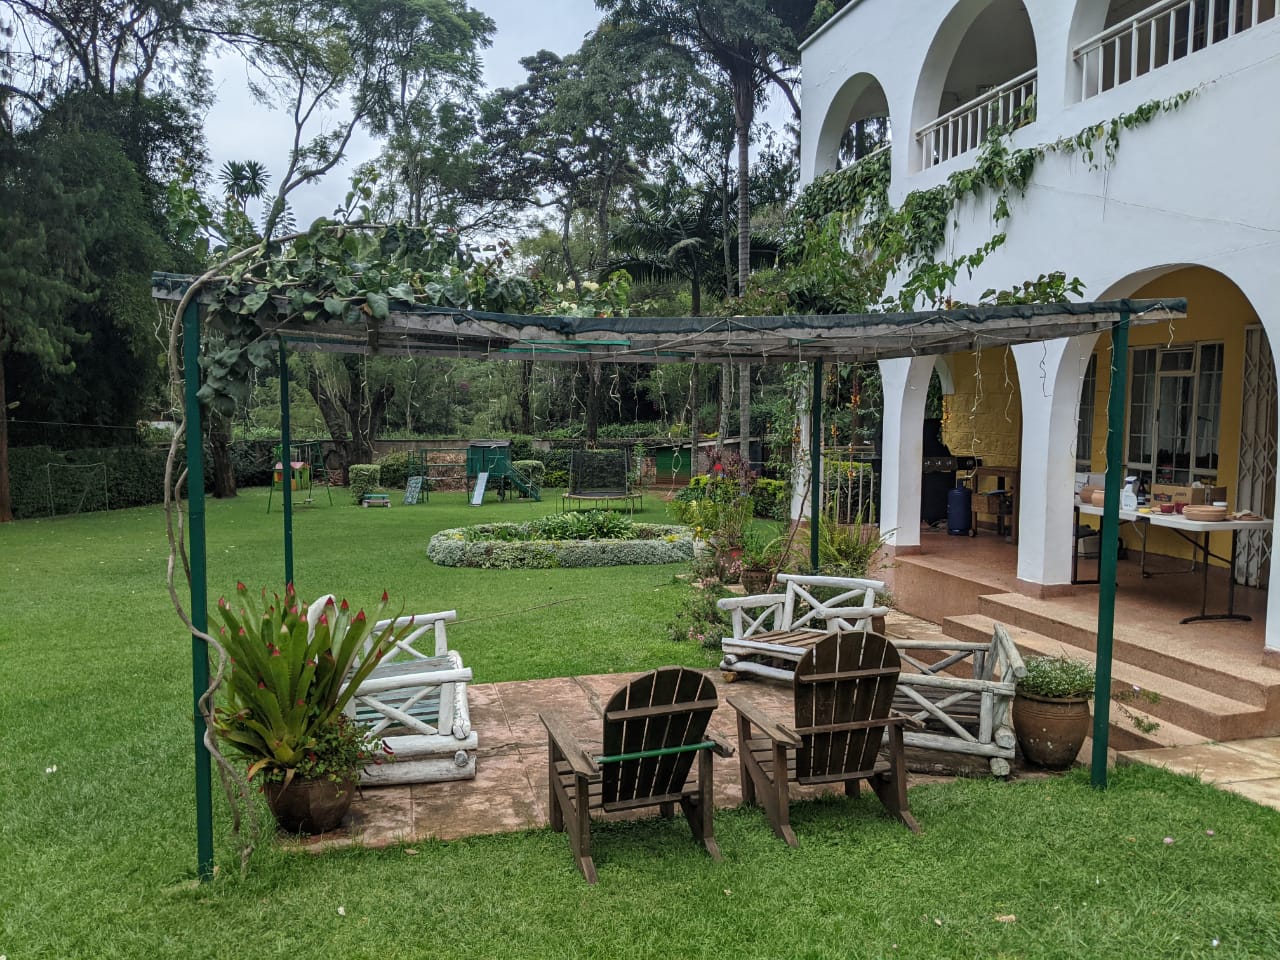 Lovely 5 Bedroom Villa for Rent in Lower Kabete, along Ngecha Road, from ksh450k per Month with exciting Amenities24